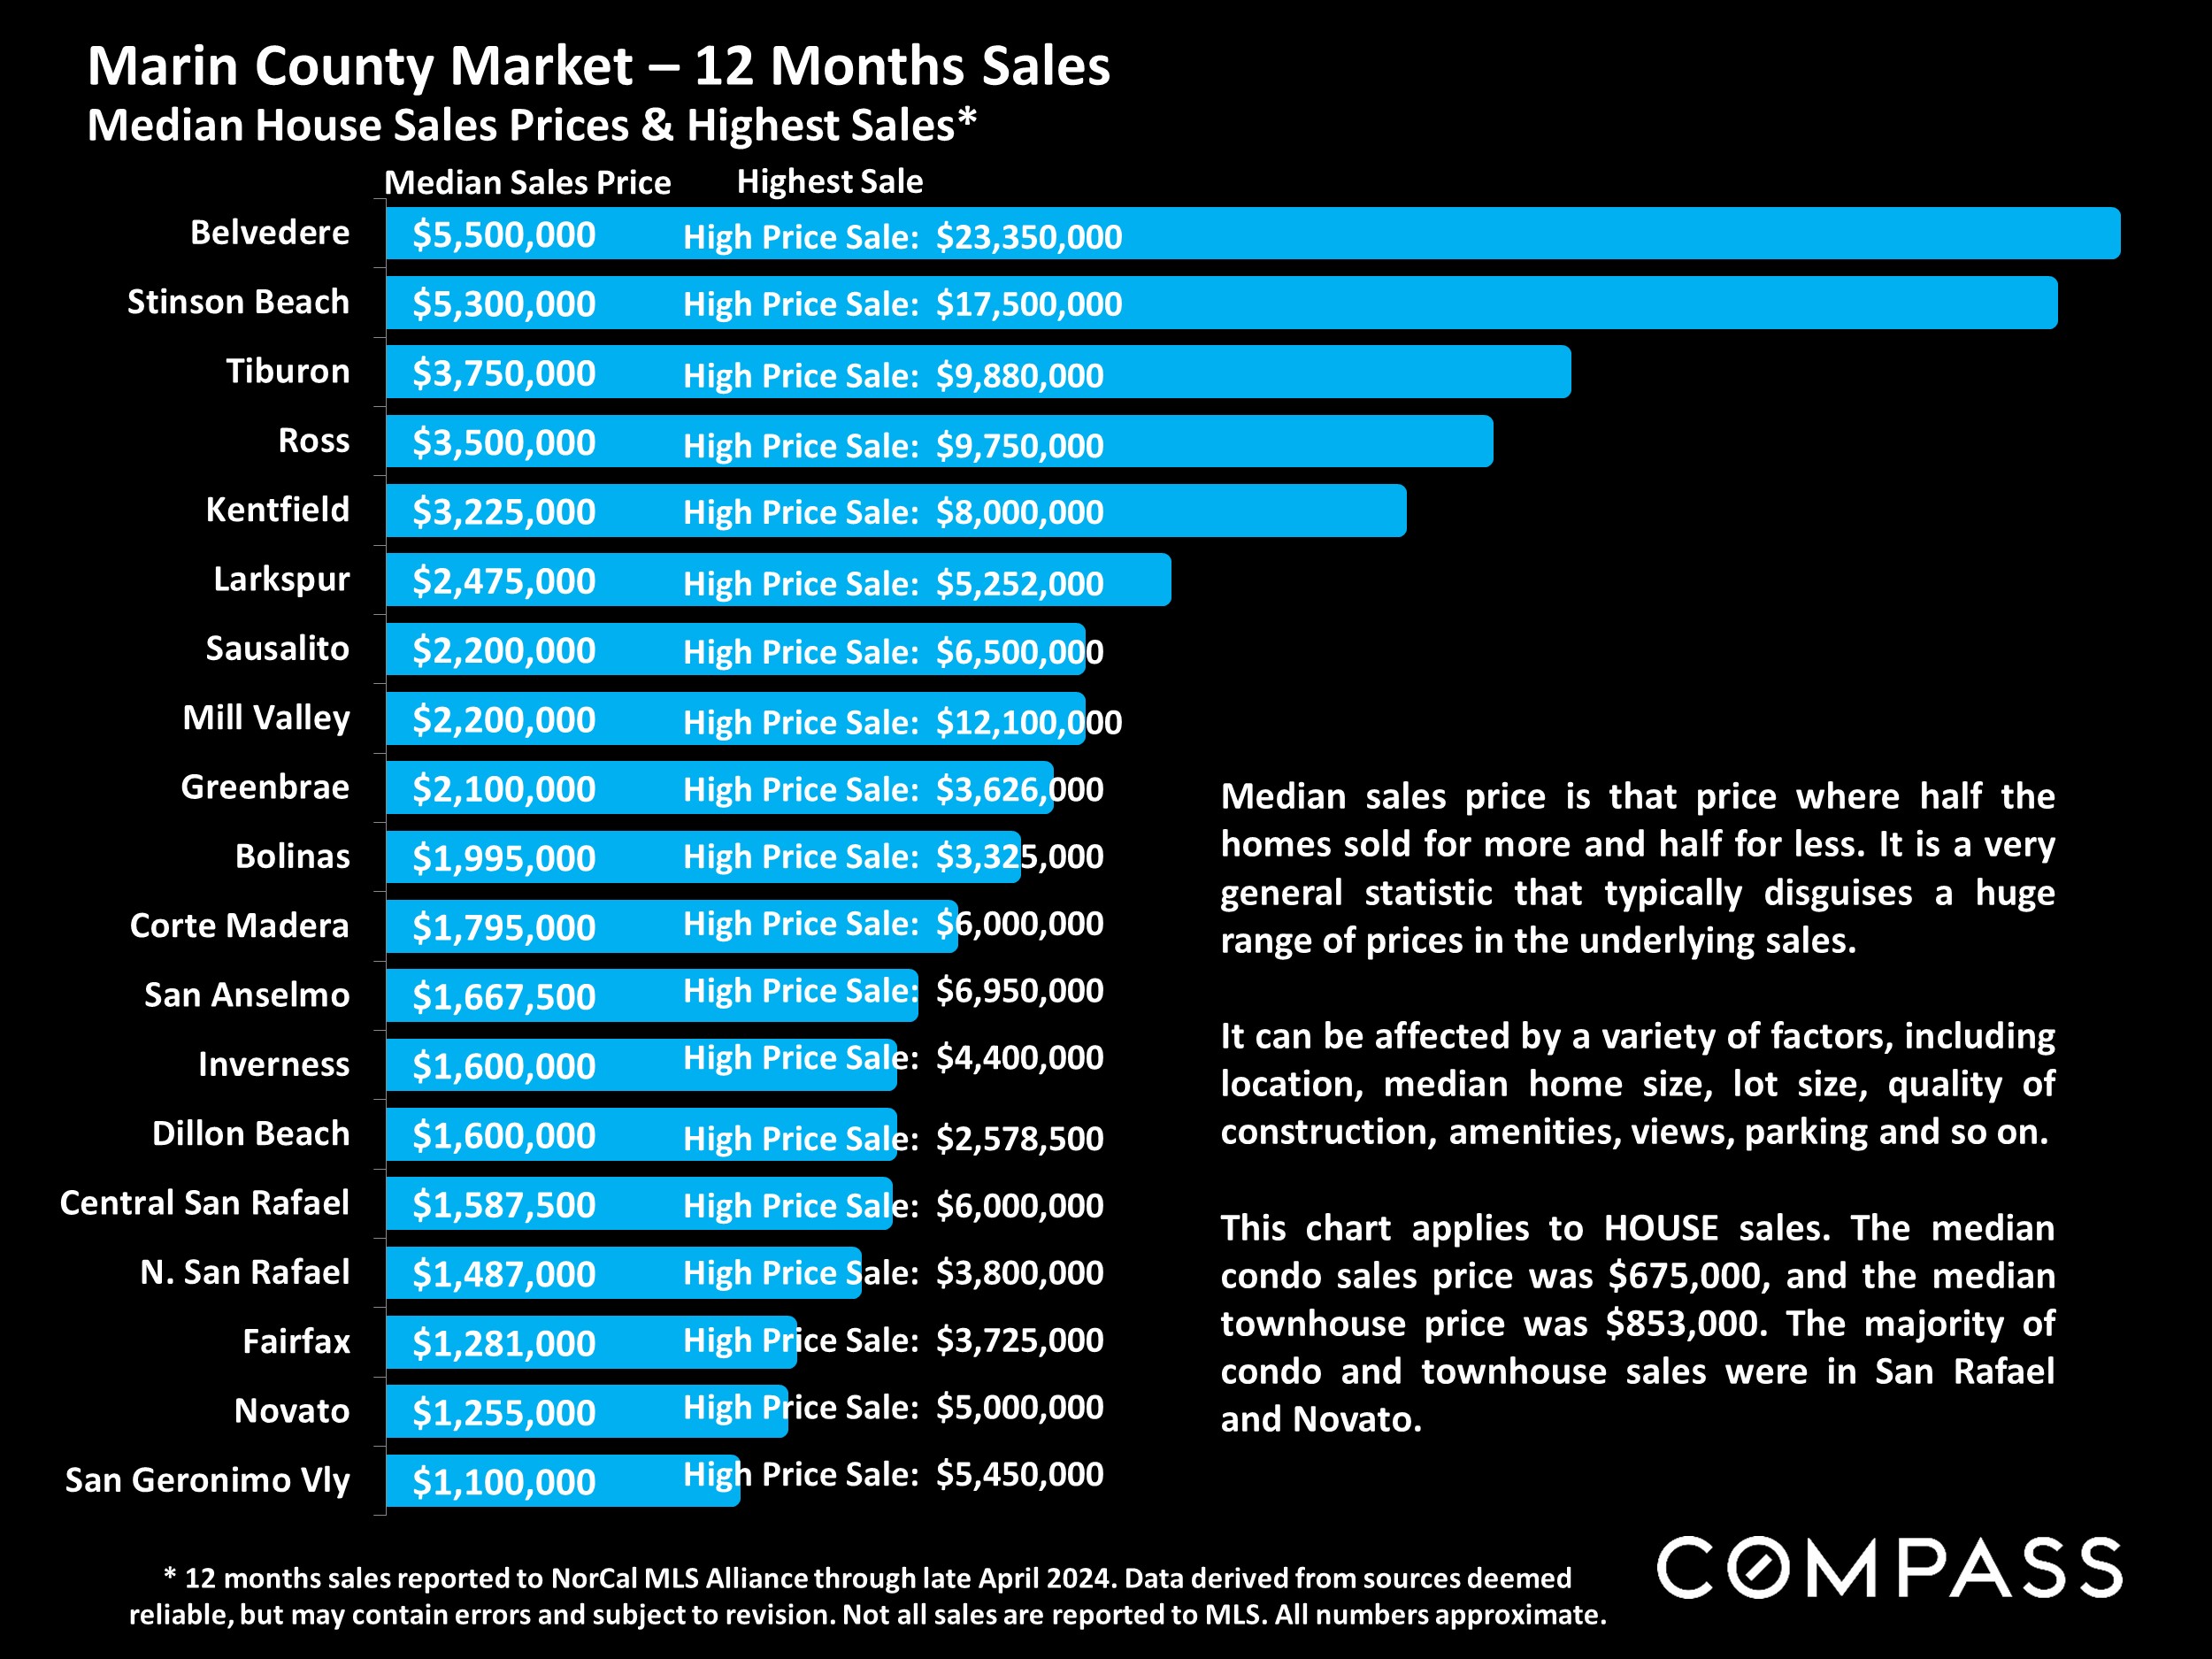 Marin County Market - 12 Months Sales Median House Sales Prices & Highest Sales*